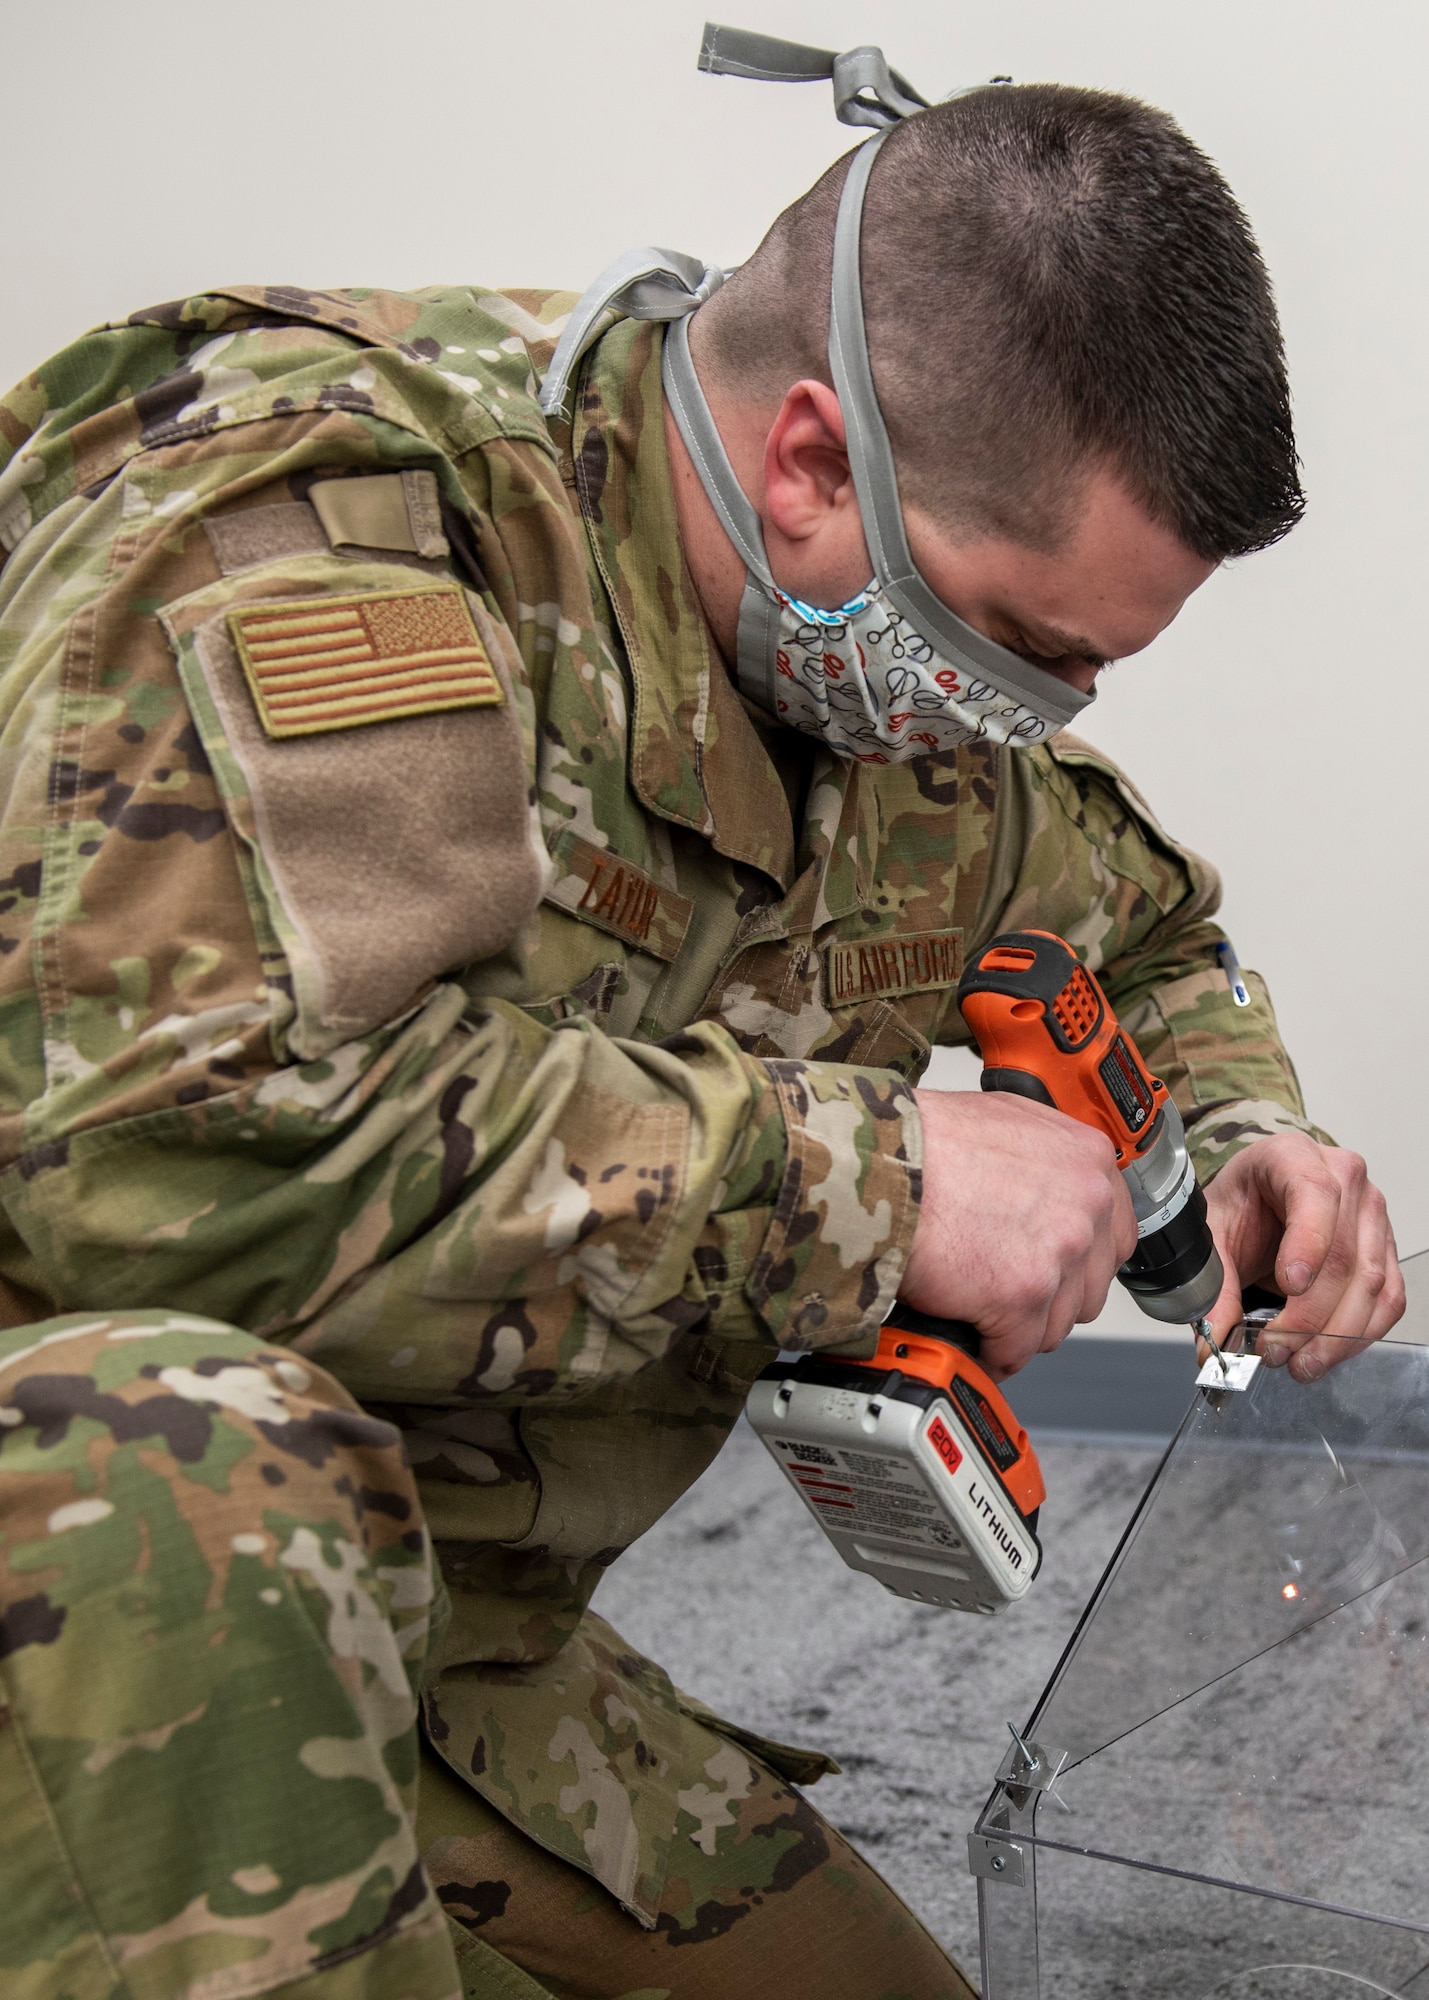 U.S. Air Force Staff Sgt. Andrew Taylor, 673d Medical Support Squadron medical logistics noncommissioned officer in charge of acquisitions, drills a hole in a plastic polycarbonate enclosure at Joint Base Elmendorf-Richardson, Alaska, April 7, 2020. Taylor and U.S. Air Force Senior Airman Michael Shoemaker, 673d Medical Support Squadron biomedical equipment technician, designed and built the reusable device to be a protective barrier between medical providers and a patient to prevent possible exposure to COVID-19 and other airborne diseases. The enclosure can be placed over a patient’s head and upper torso prior to intubation or similar treatments, with access to the patient via two holes at the head of the enclosure for a physician's hands and arms, and two side doors for additional access.